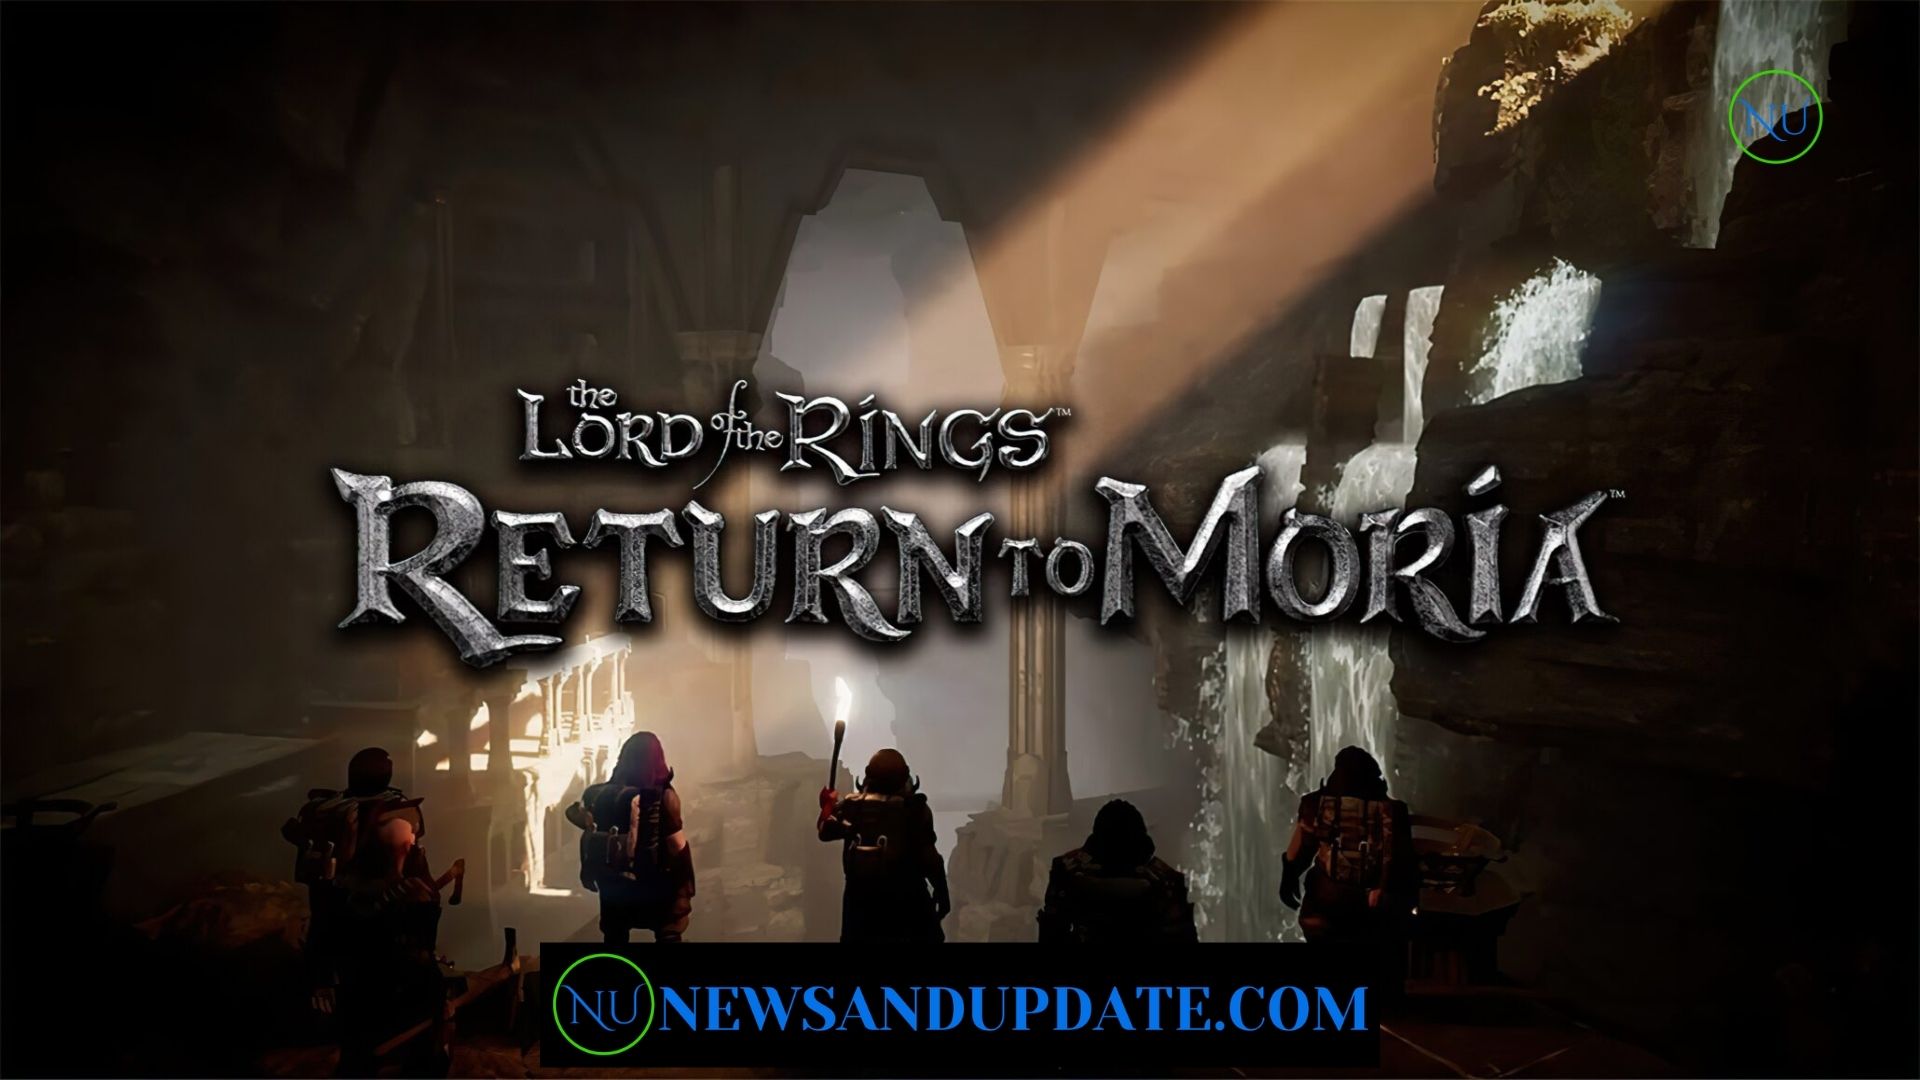 The Lord of the Rings: Return to Moria survival crafting game is on the way